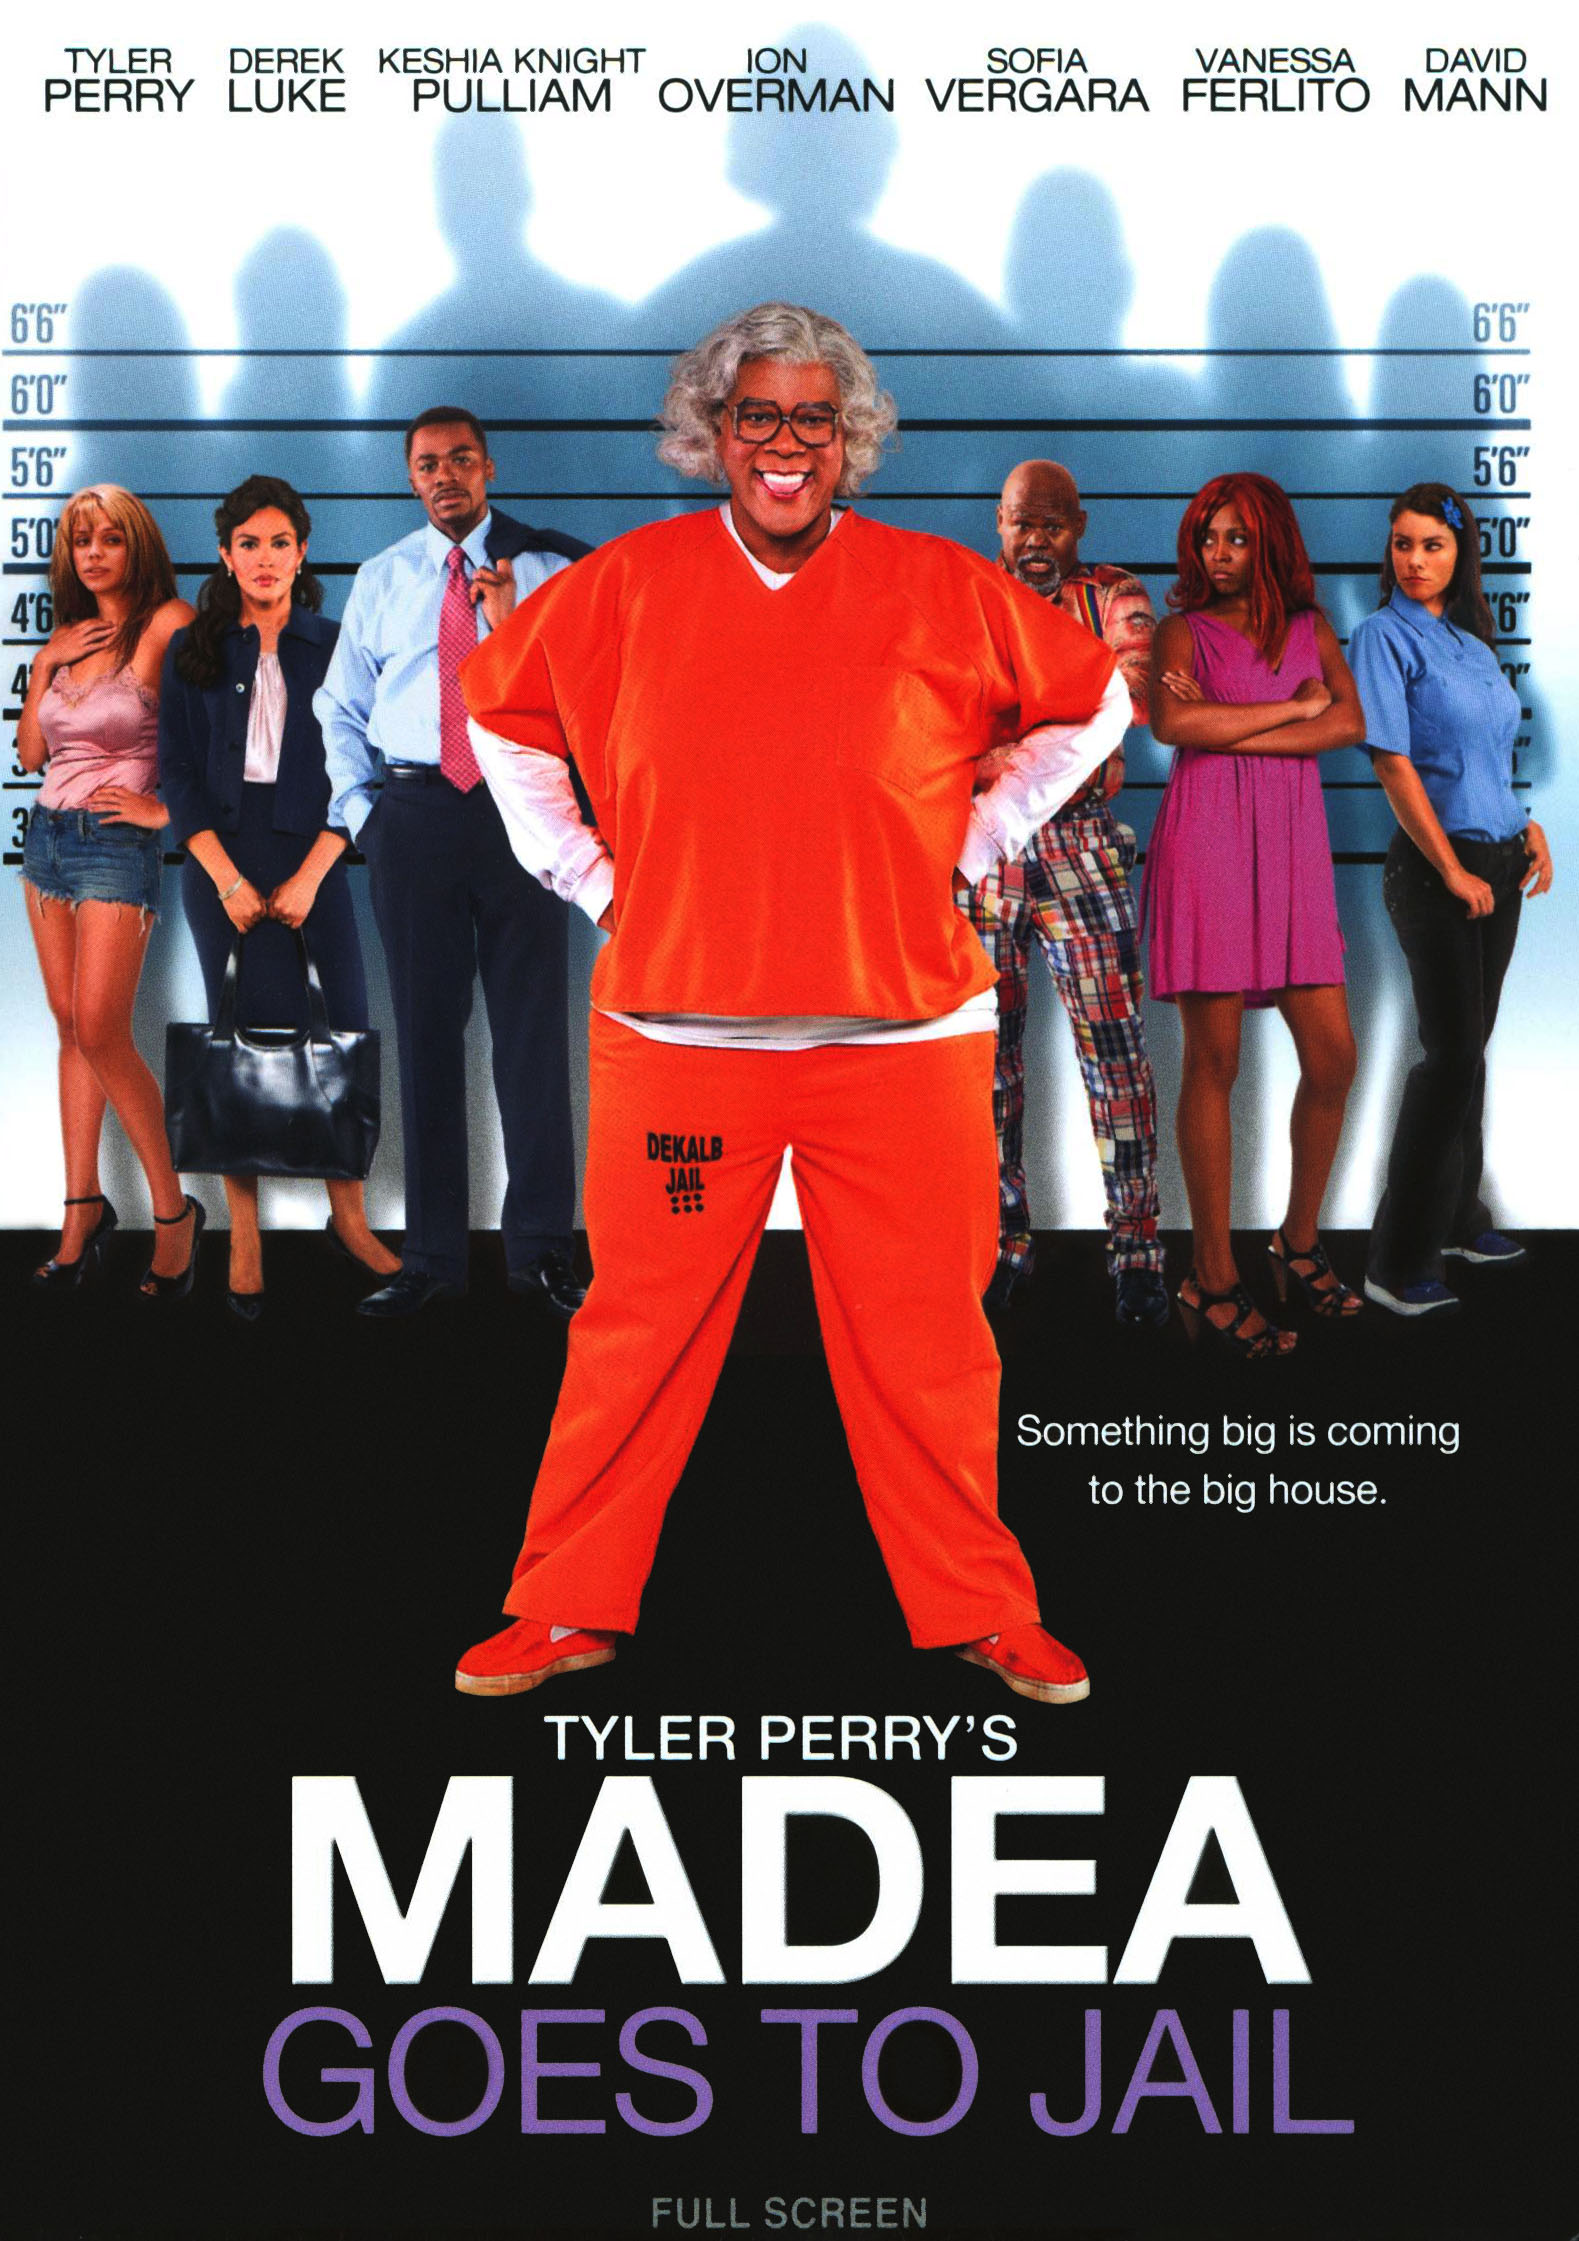 Madea Goes To Jail (2009) Main Poster